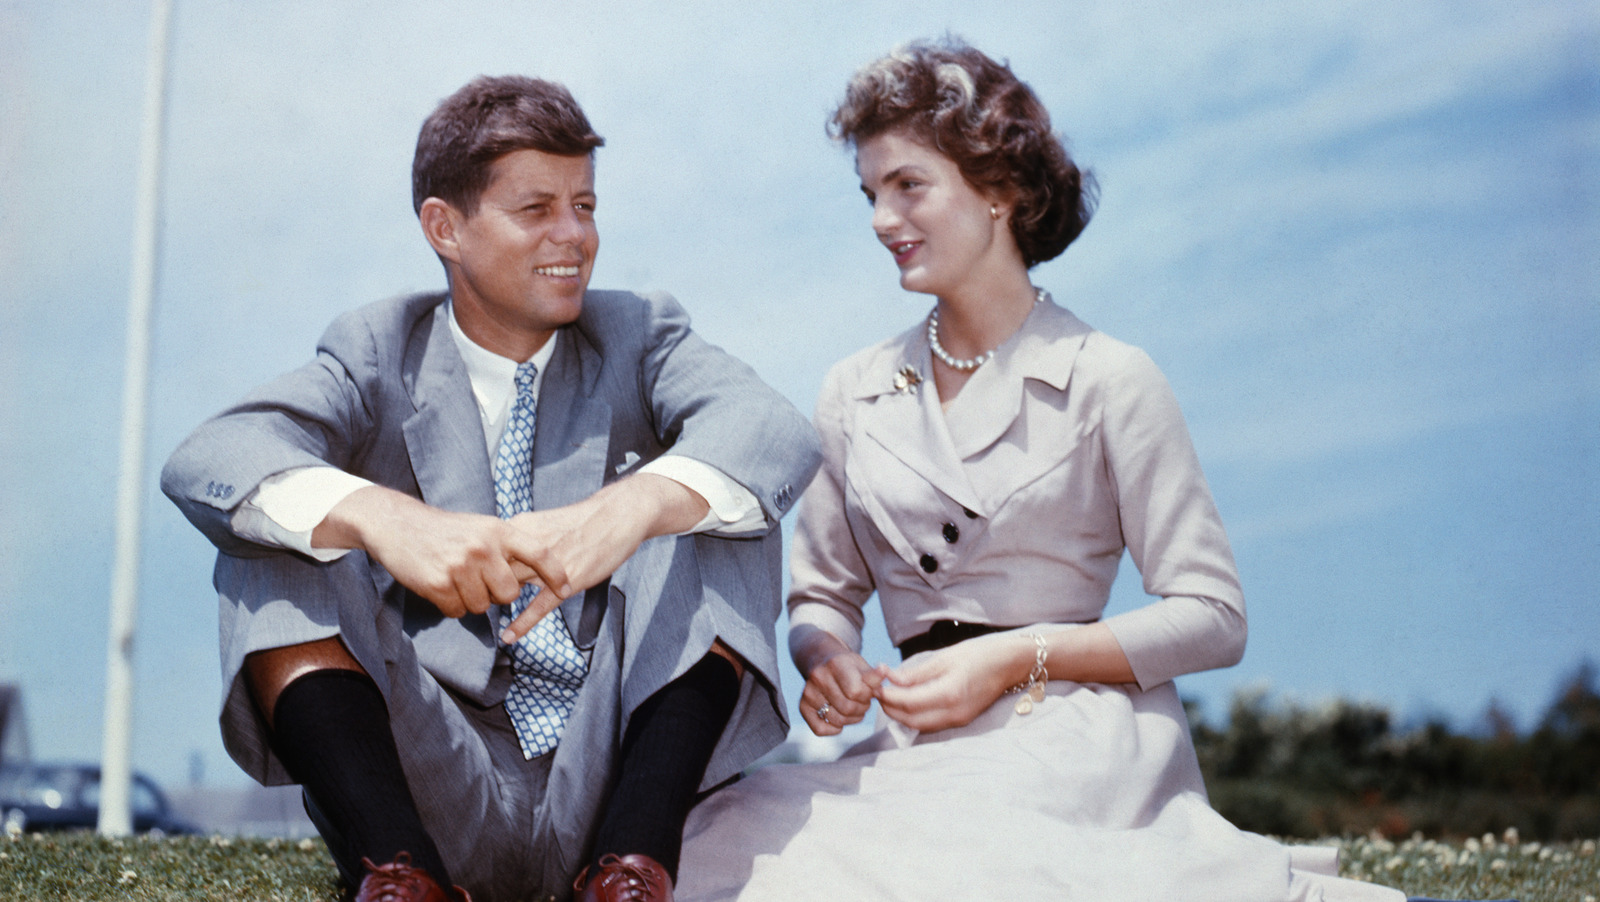 John F. Kennedy's family reportedly hid his affairs by bribing Jackie O